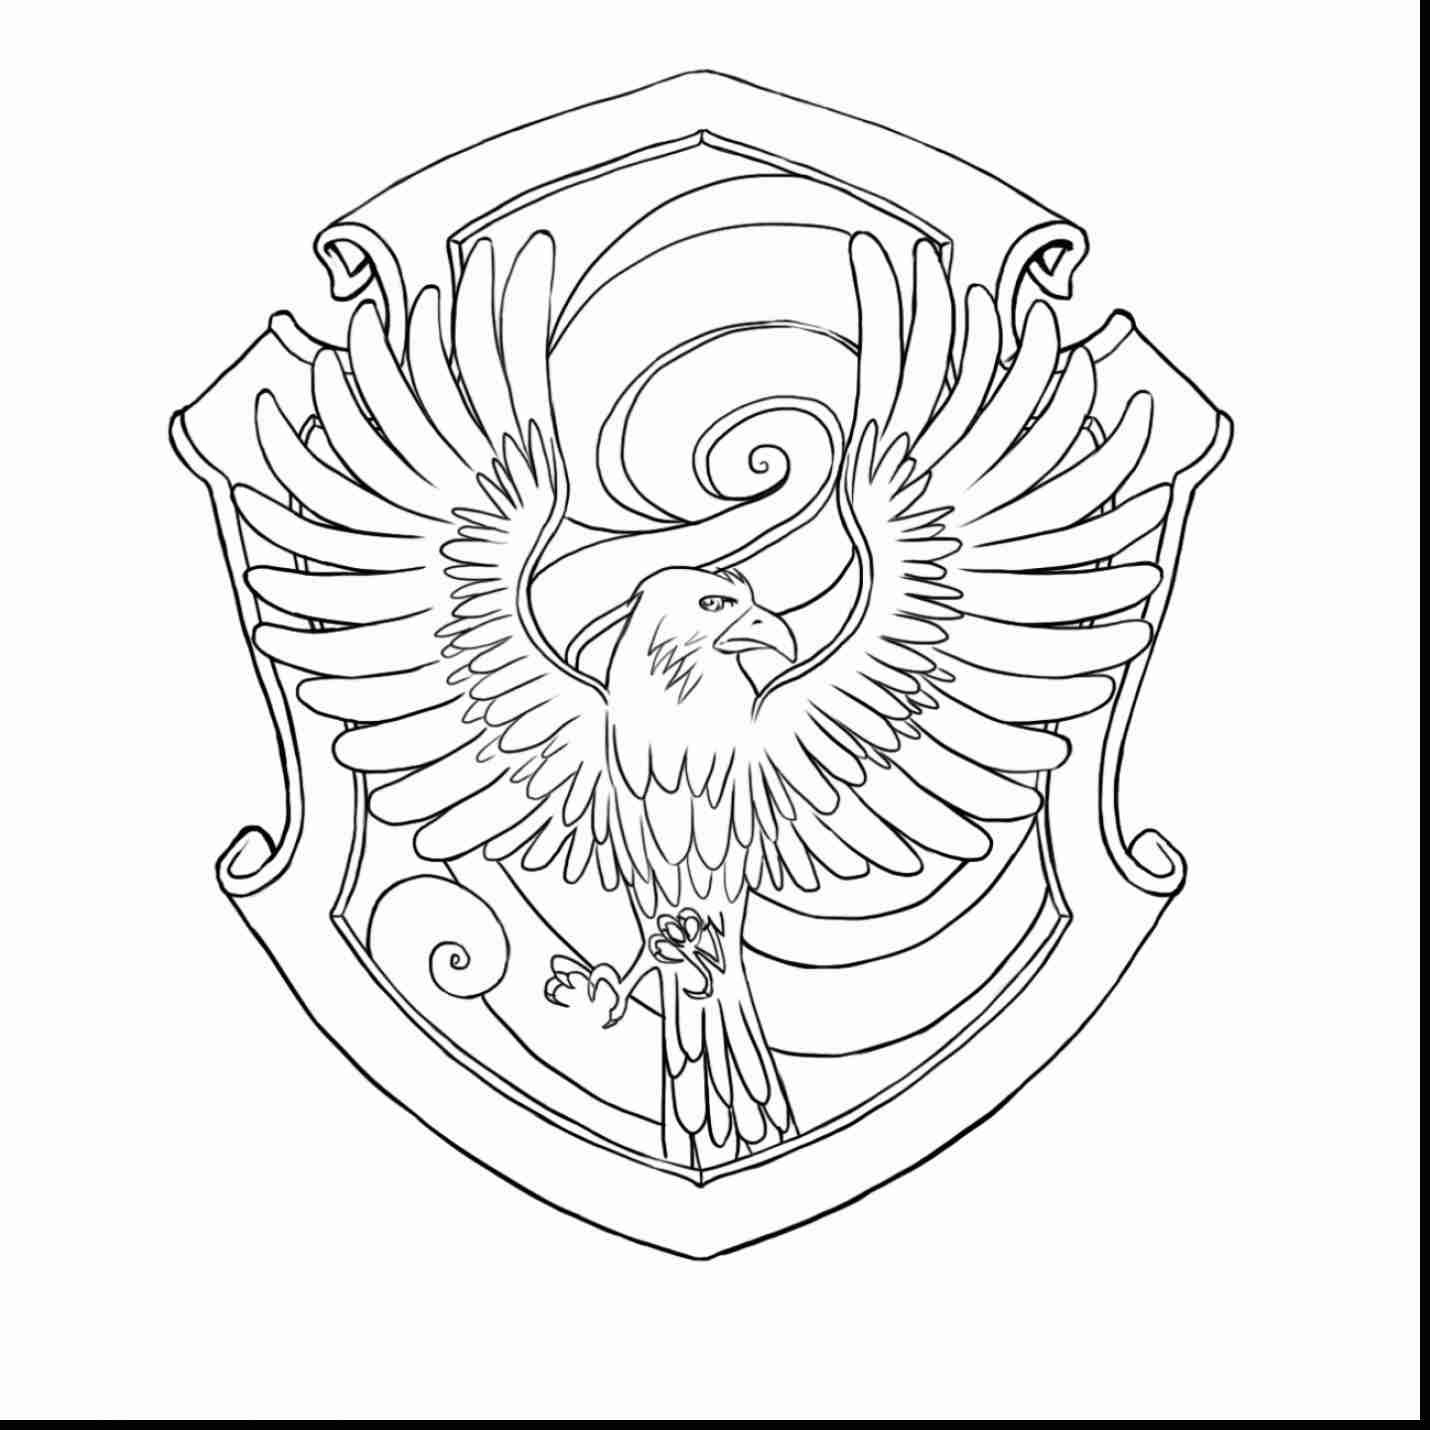 Harry Potter Hogwarts Coloring Pages at GetColorings.com | Free